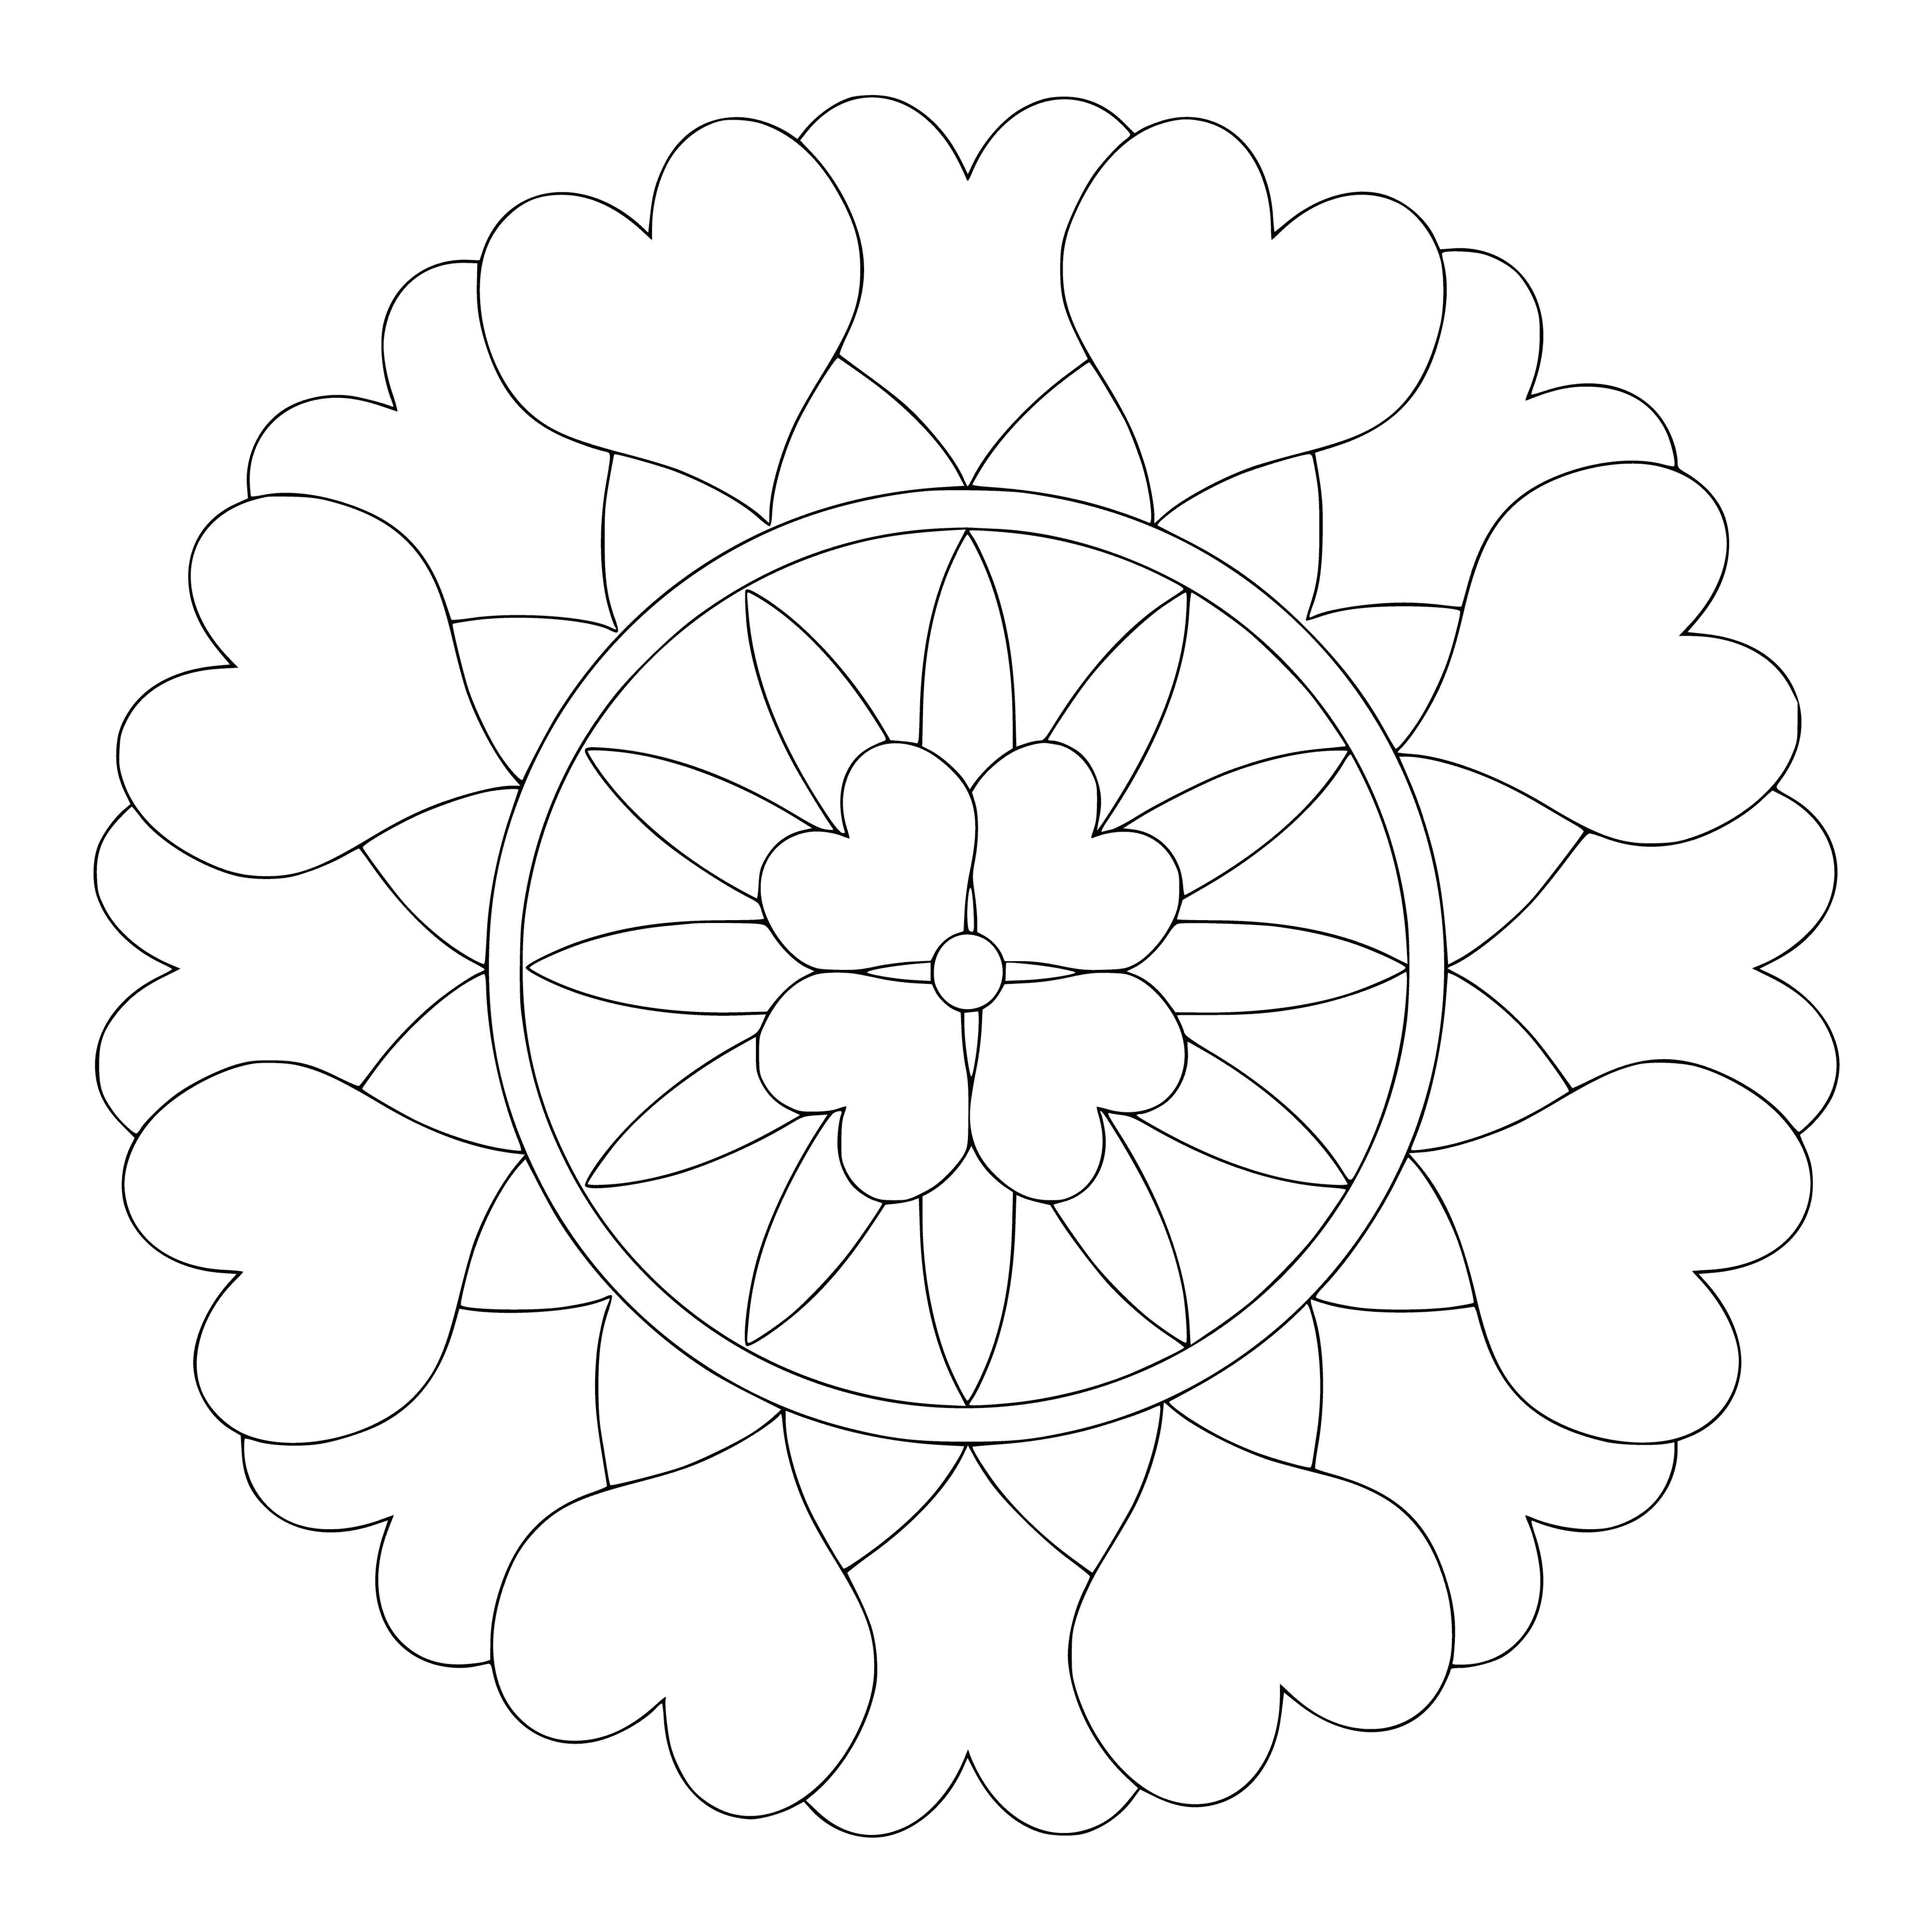 coloring page: Creating mandalas, symbolizing the interconnection of life and the universe, is a meditation practice. ?‍♀️A large flower in the center of a mandala encircled by leaves, vines, and flowers in a square with curved corners. Meditation through mandala making builds understanding of the universe.